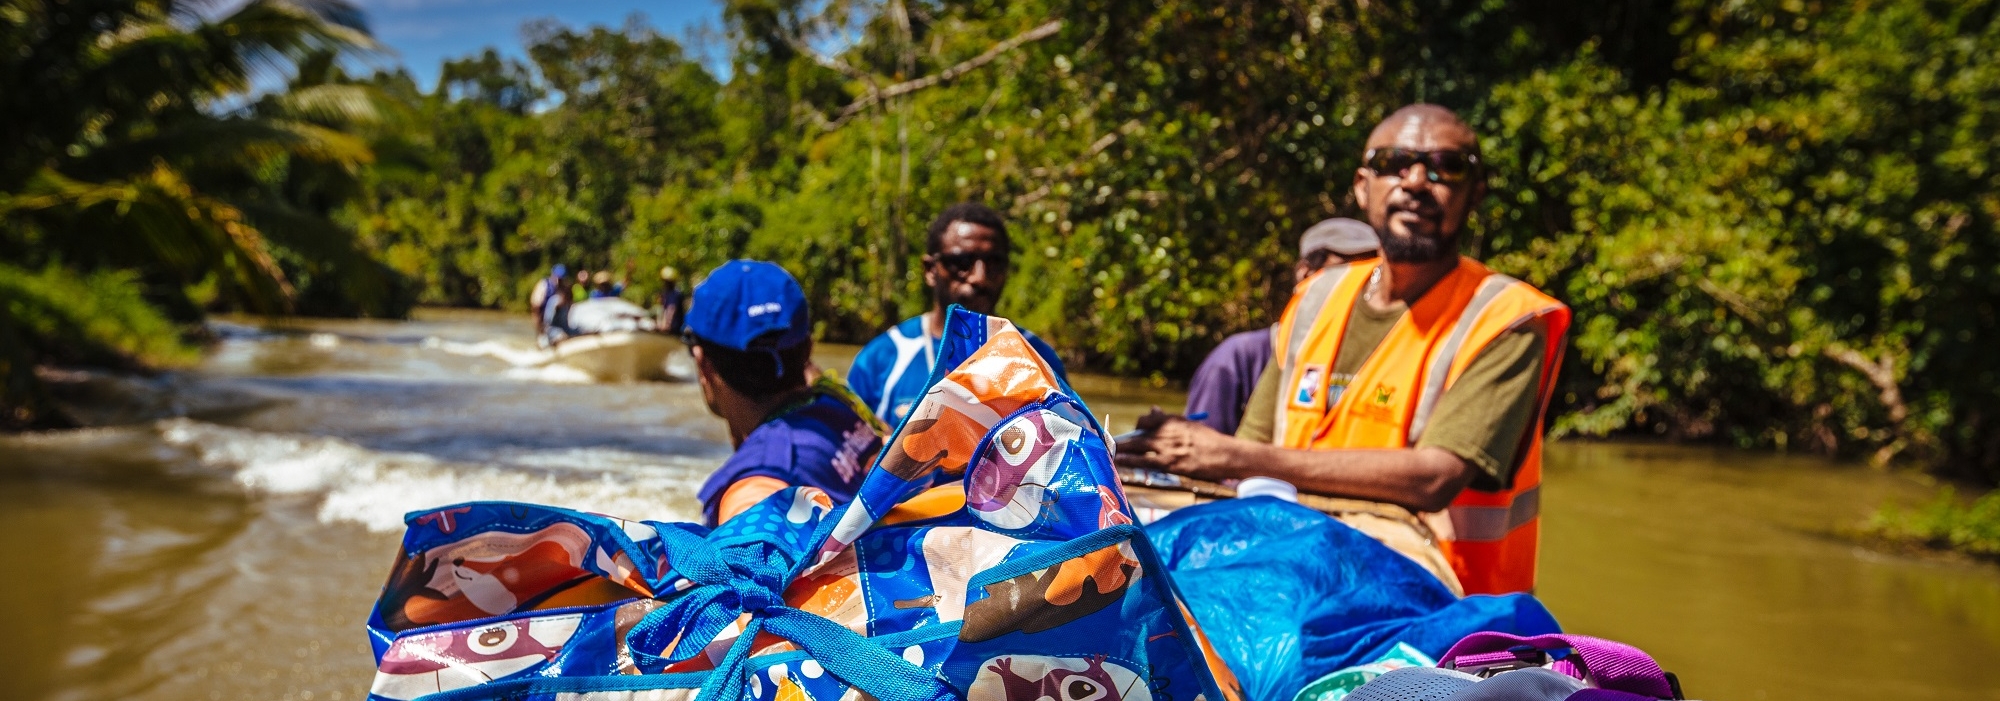 Delivering NFI's to remote communities displaced by flooding - Photo Muse Mohammad © IOM